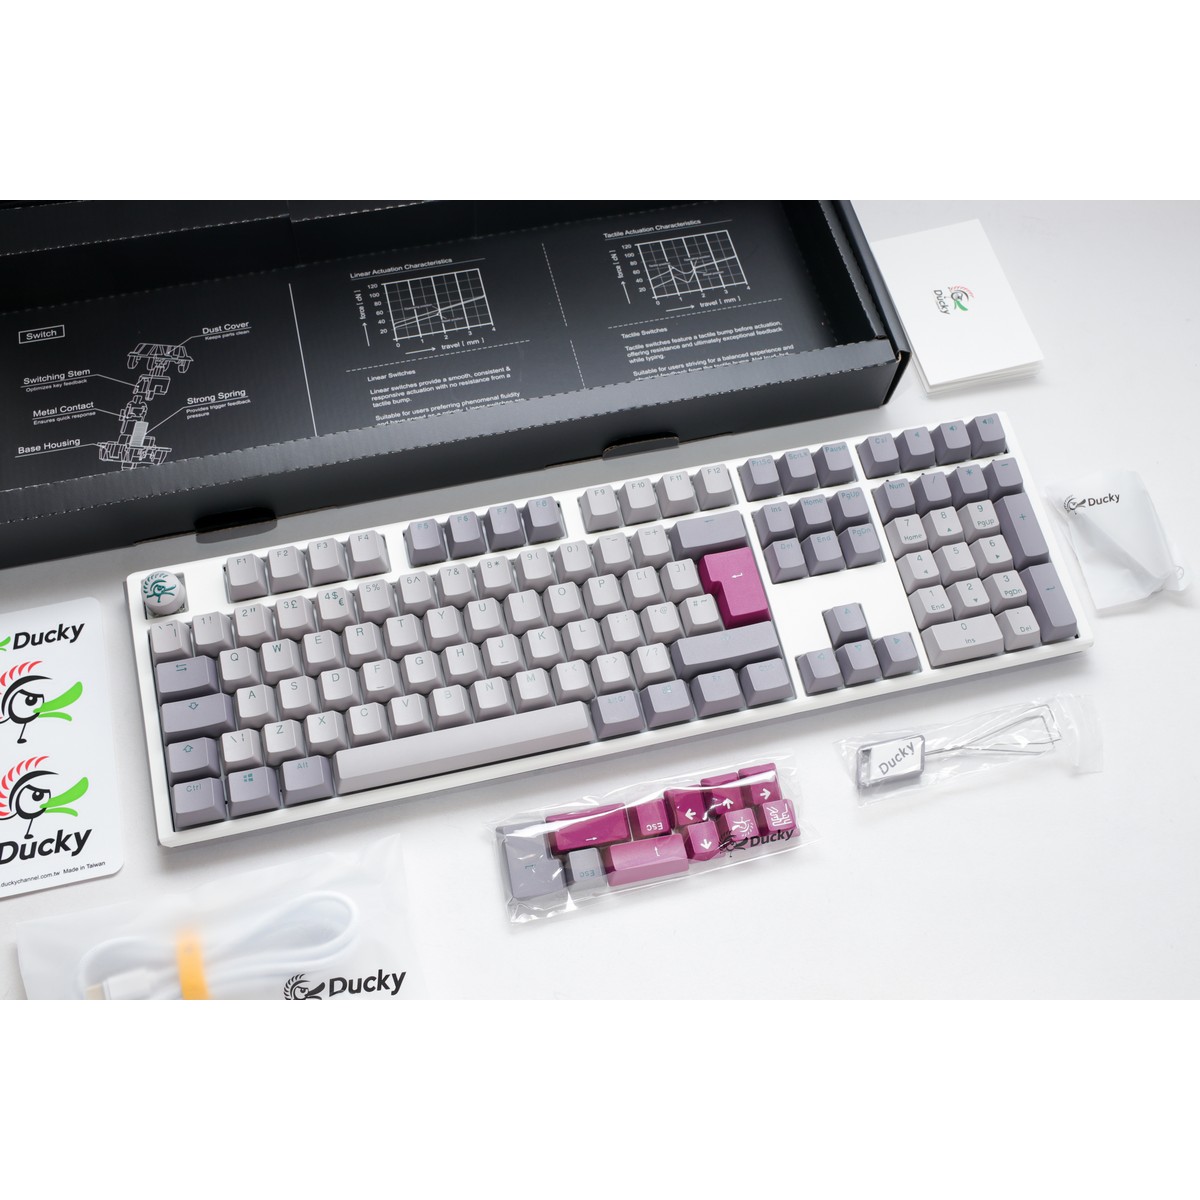 Ducky - Ducky One 3 Mist USB RGB Mechanical Gaming Keyboard Cherry MX Red Switch - UK Layout